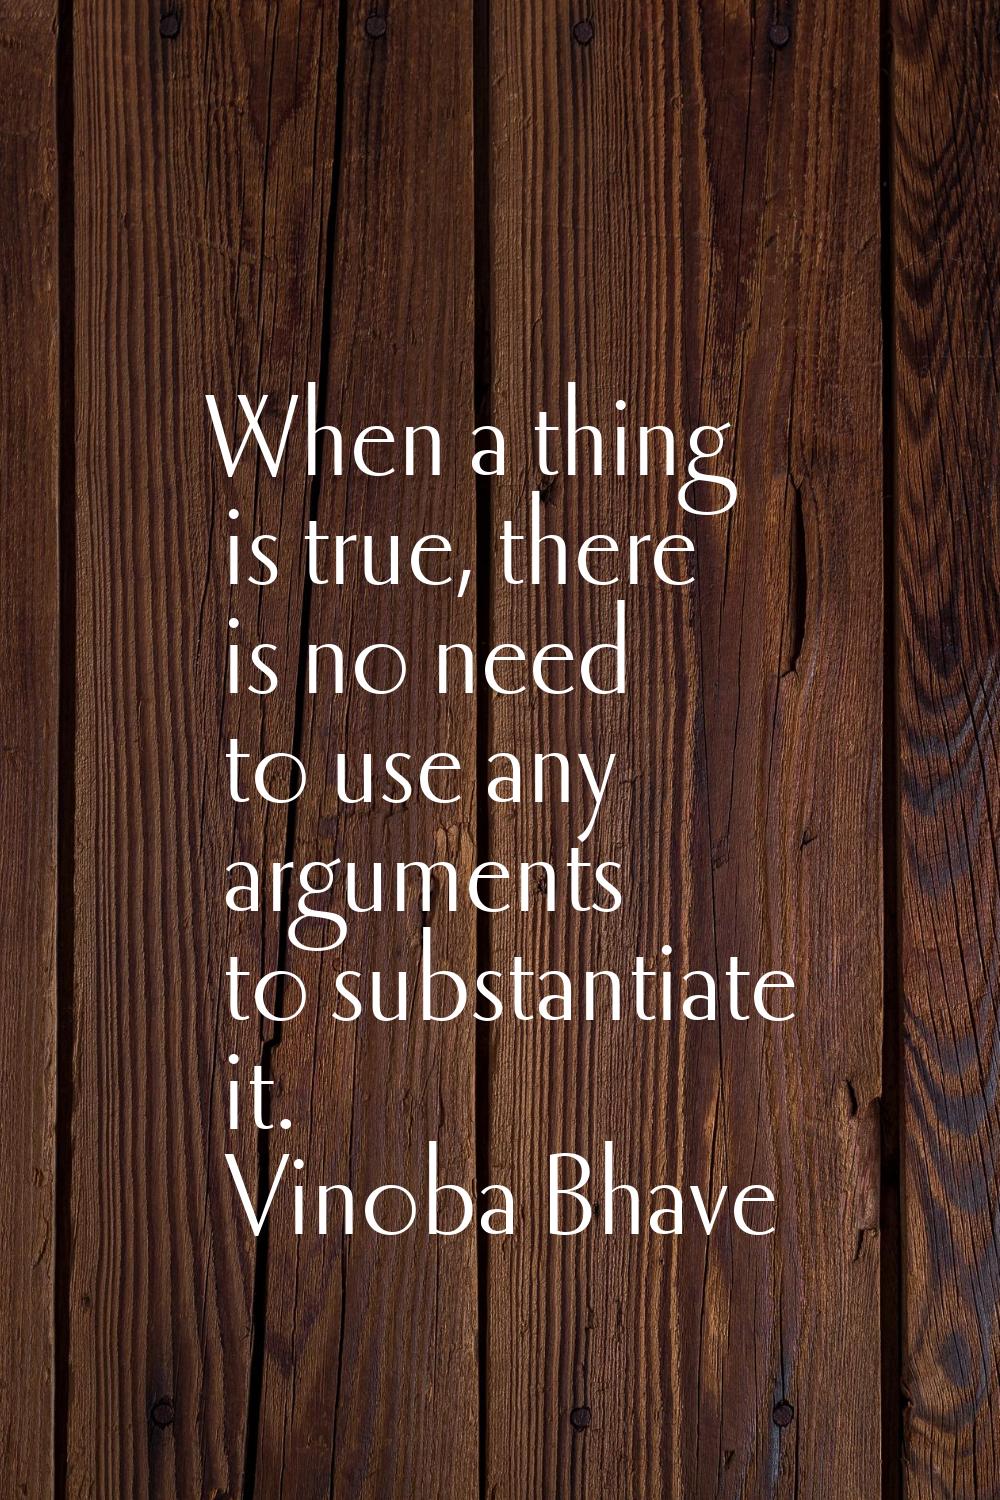 When a thing is true, there is no need to use any arguments to substantiate it.